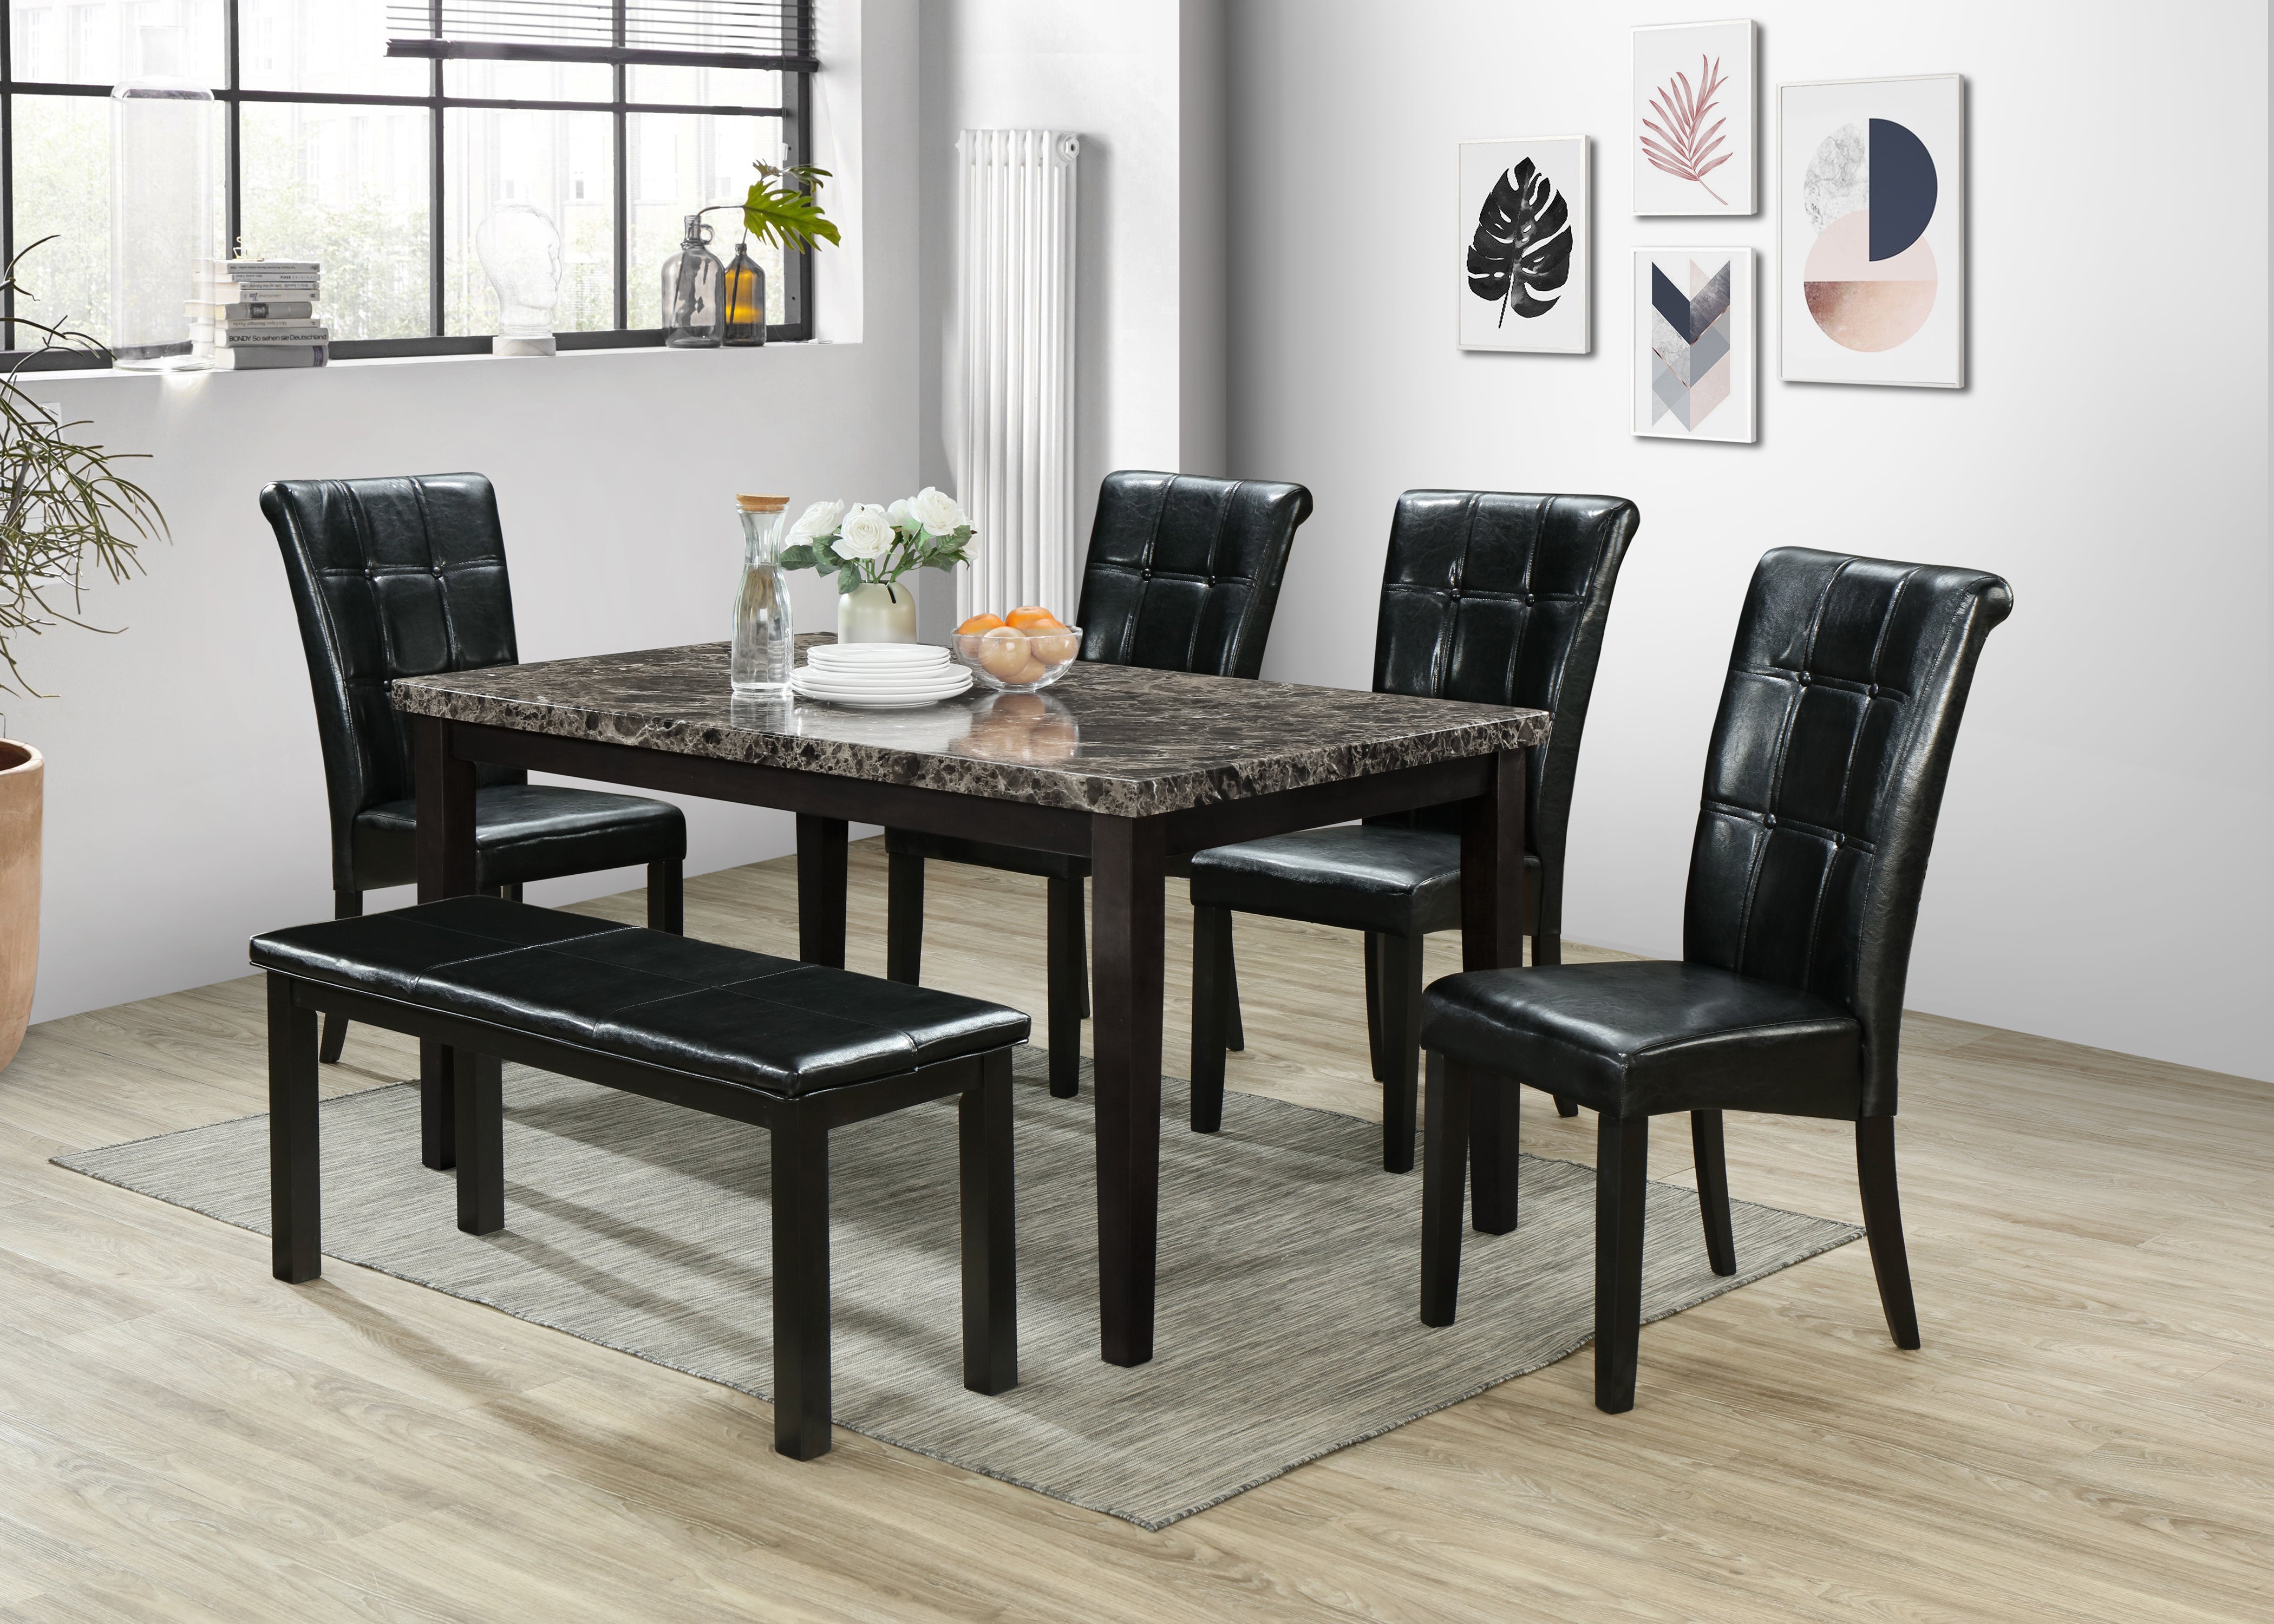 Black Dining Room Set For 6 / Dufl7 Blk 21 7 Piece Kitchen Dining Table